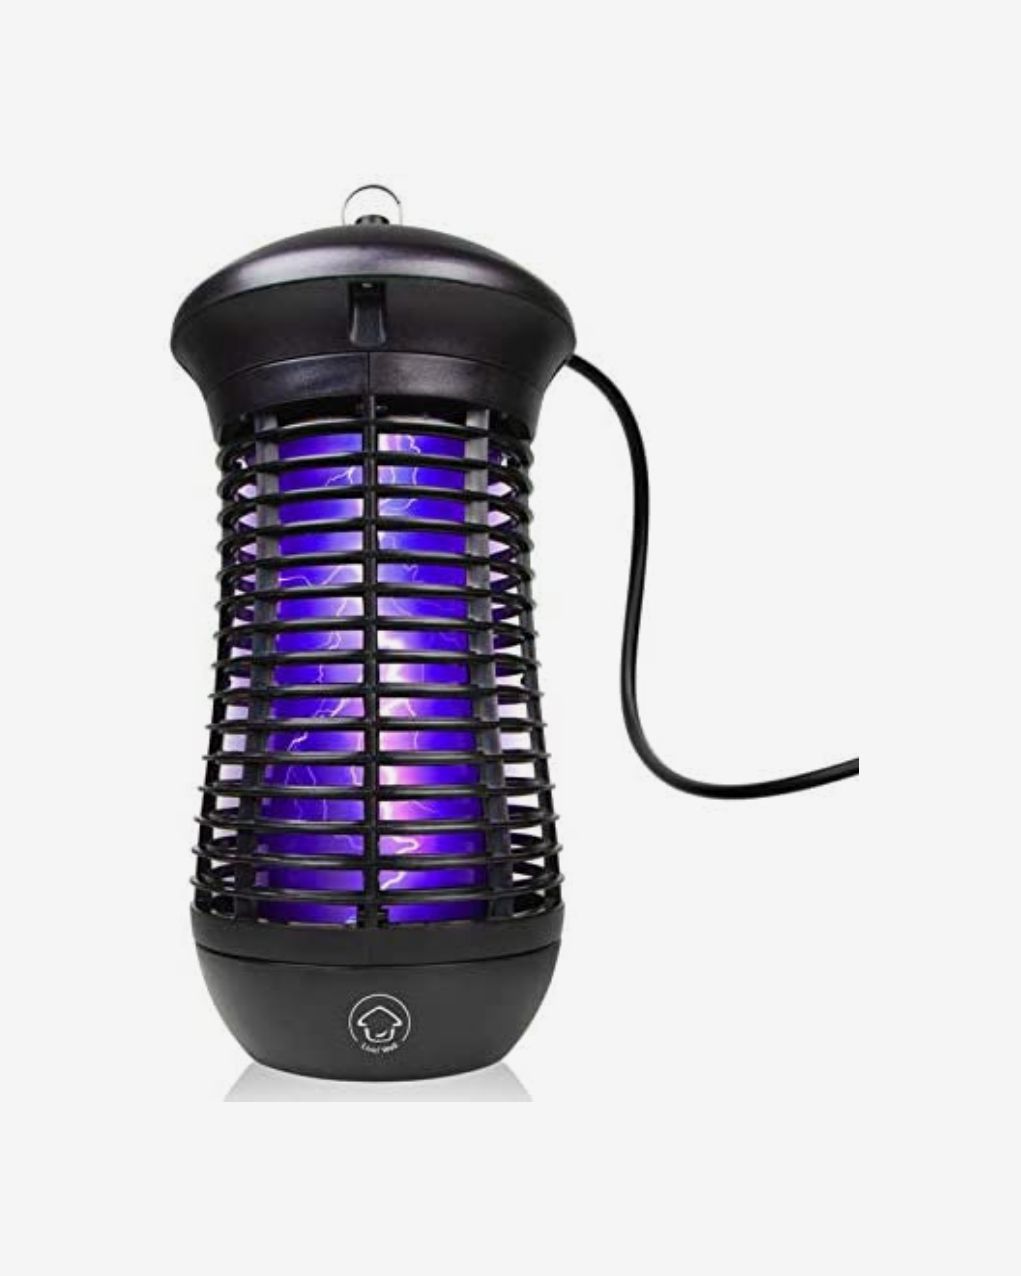 Insect Killer Zapper XL Insects Killer Bug Zapper Table Top Mosquito Attractant Trap Fly Zapper Crio Bug Zapper Indoor and Outdoor Fly Trap Outdoor Patio Mosquito Trap Insect Zapper 